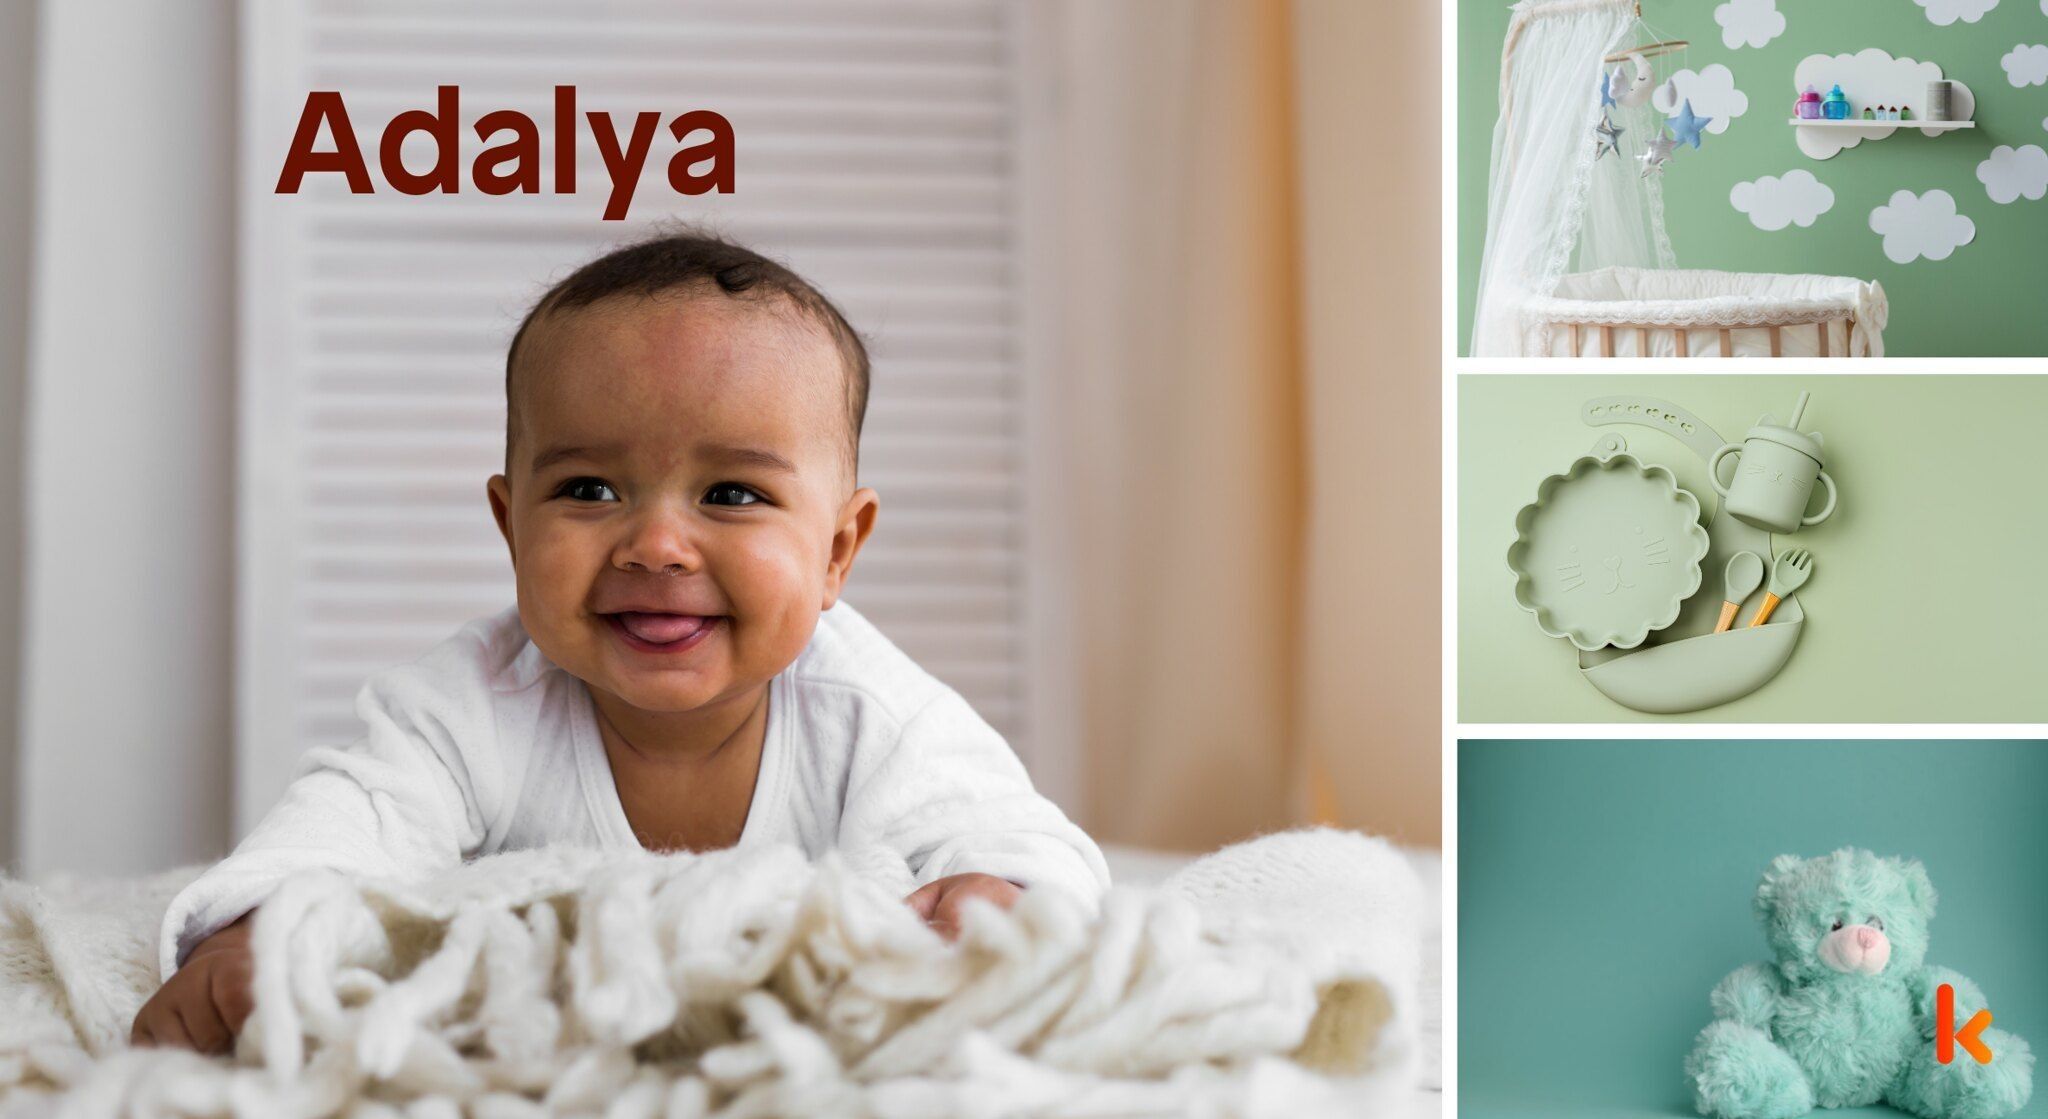 Meaning of the name Adalya